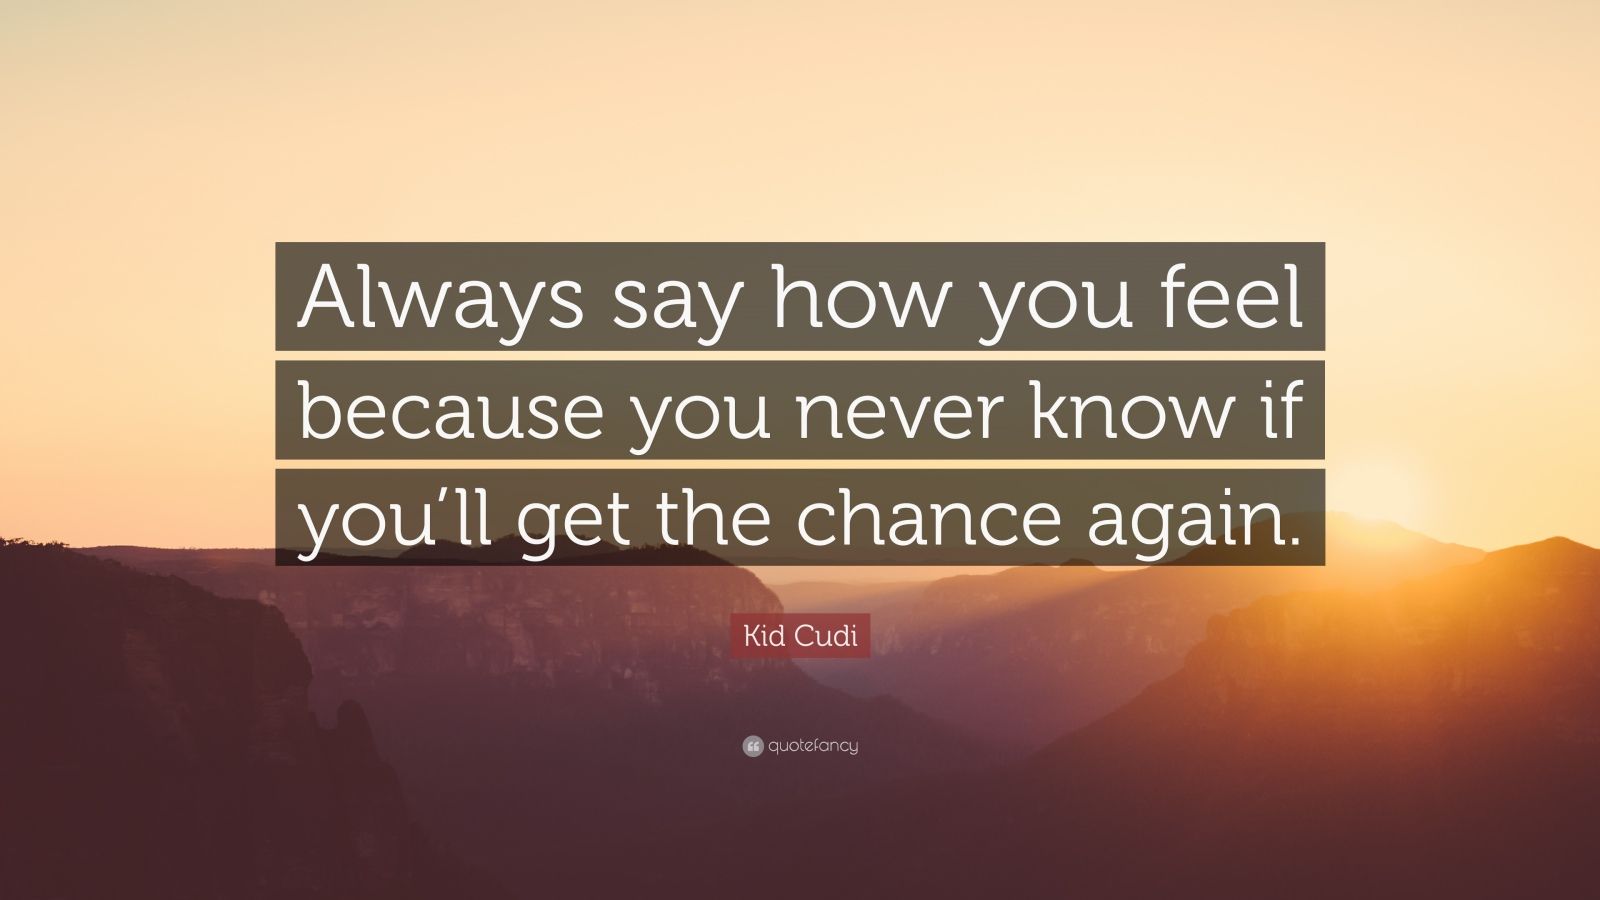 Kid Cudi Quote “Always say how you feel because you never